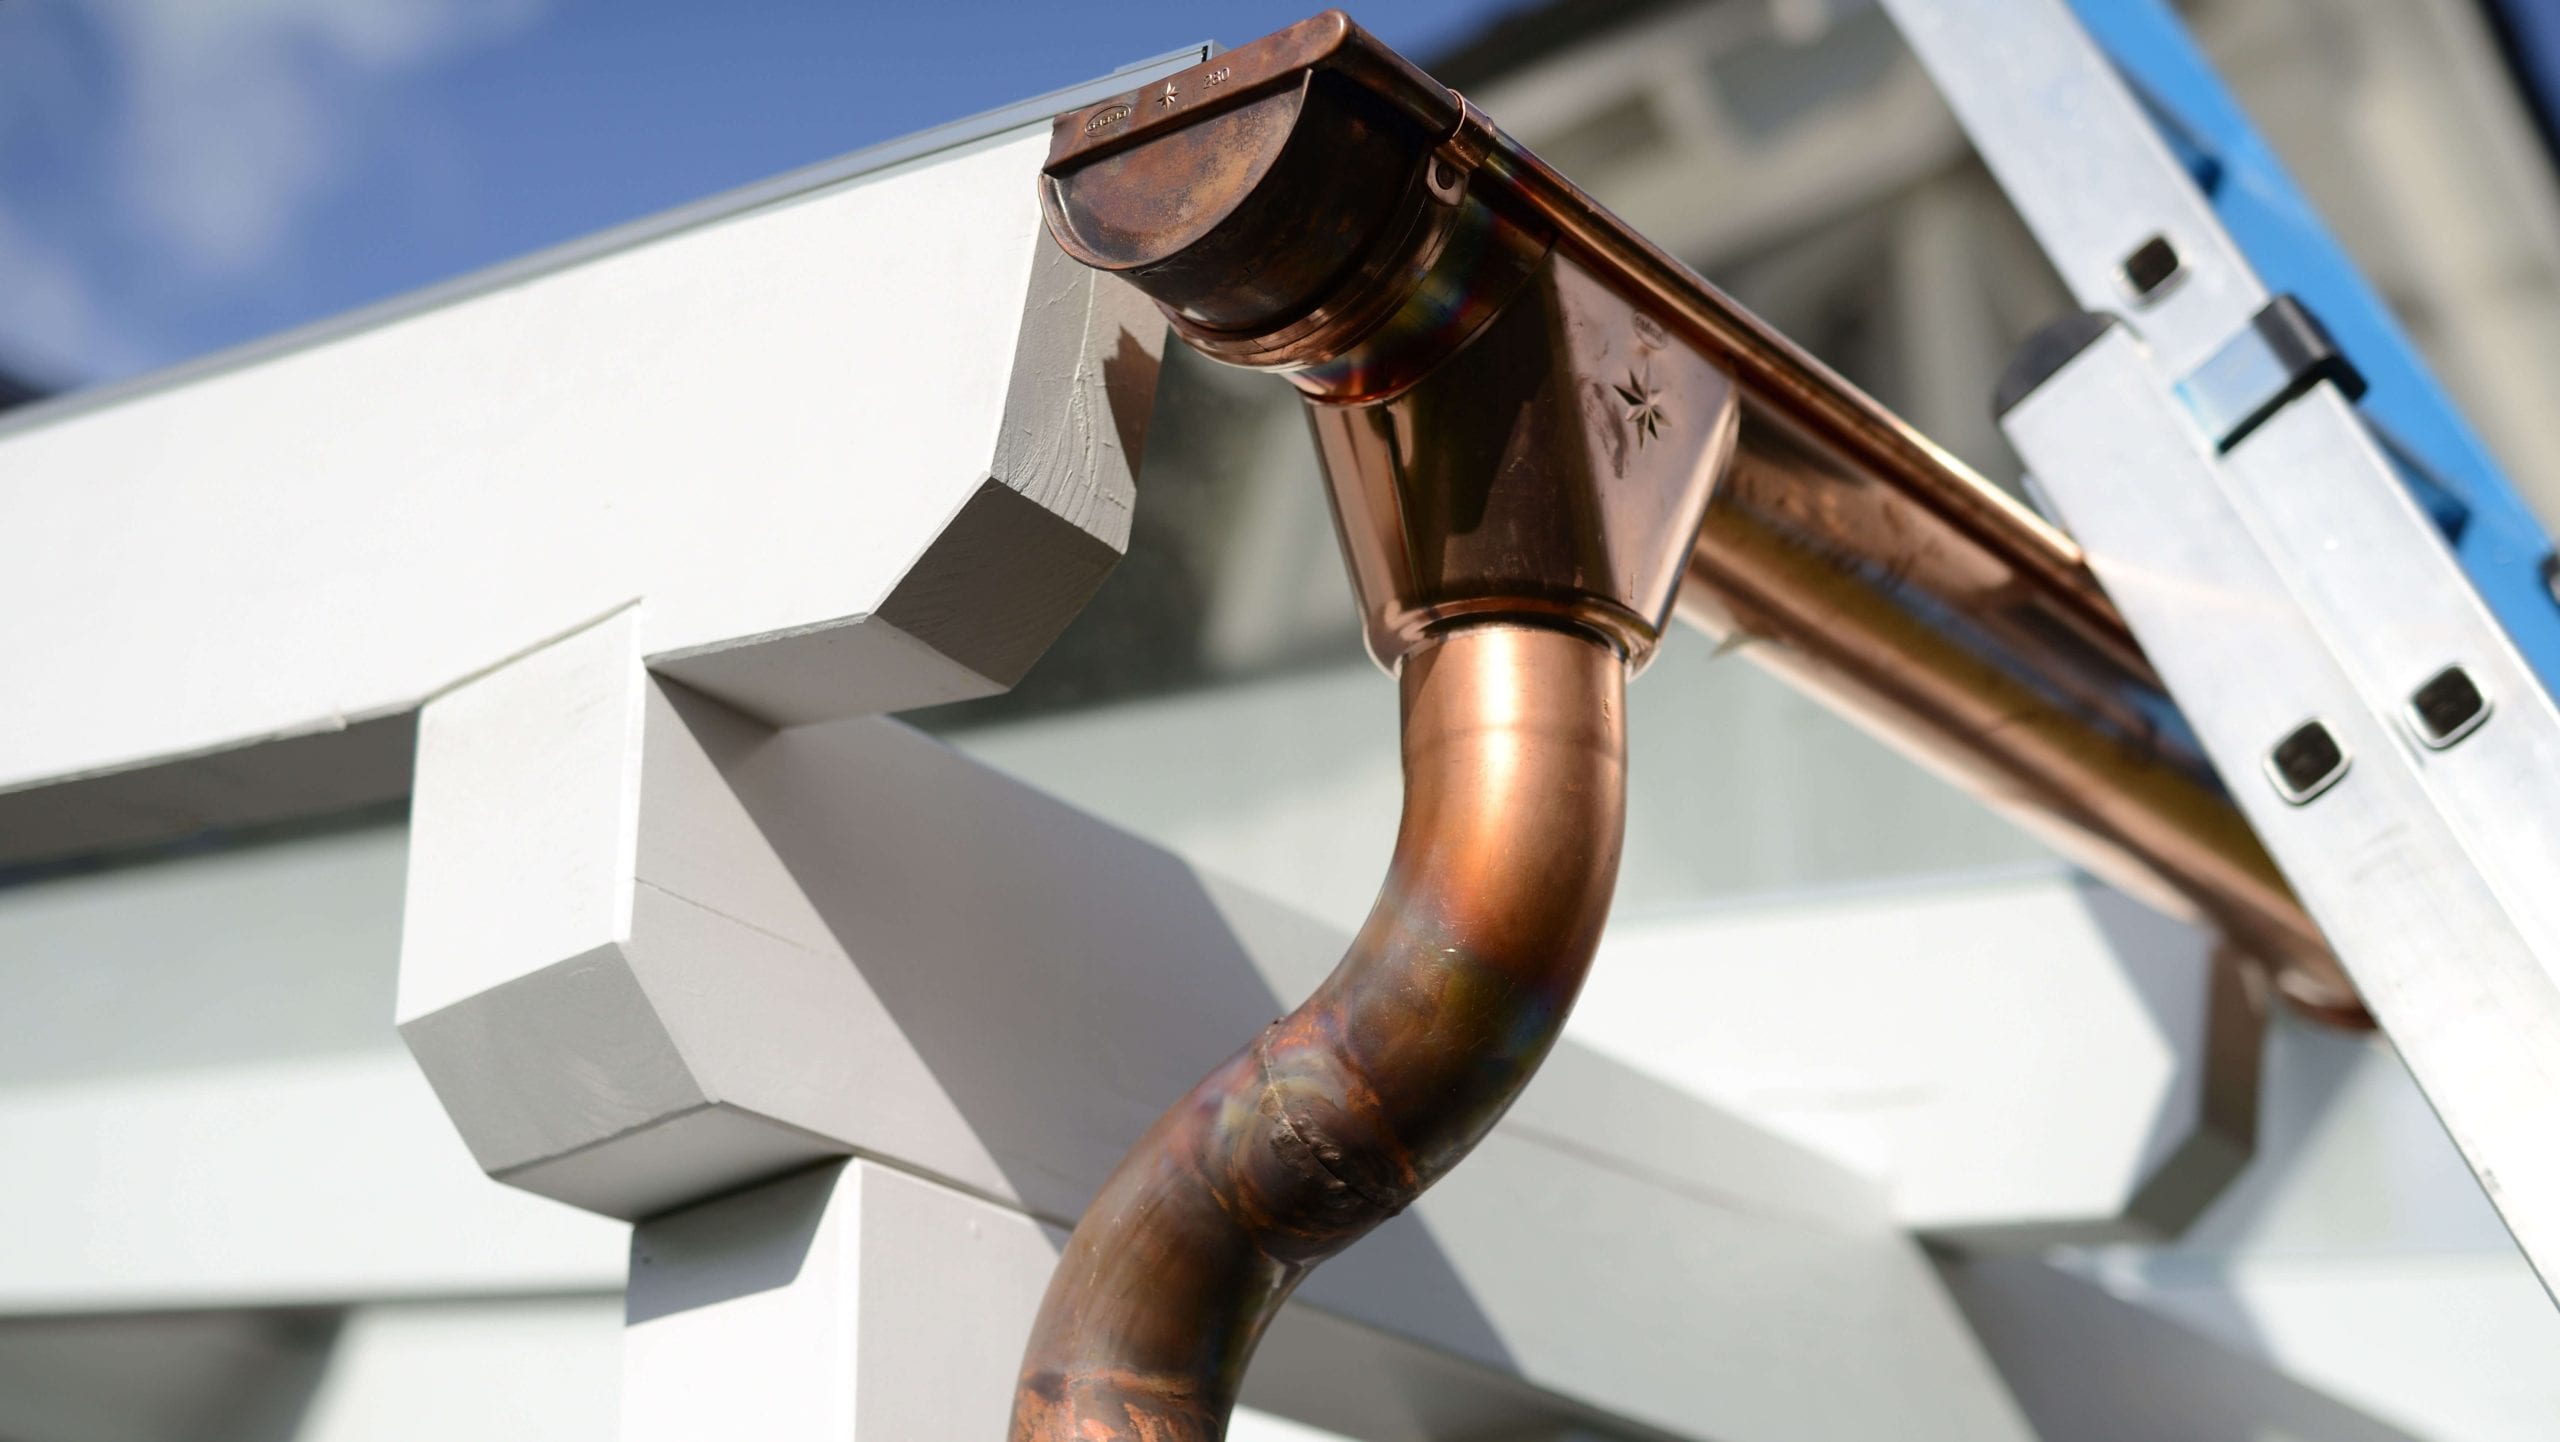 Make your property stand out with copper gutters. Contact for gutter installation in Macon